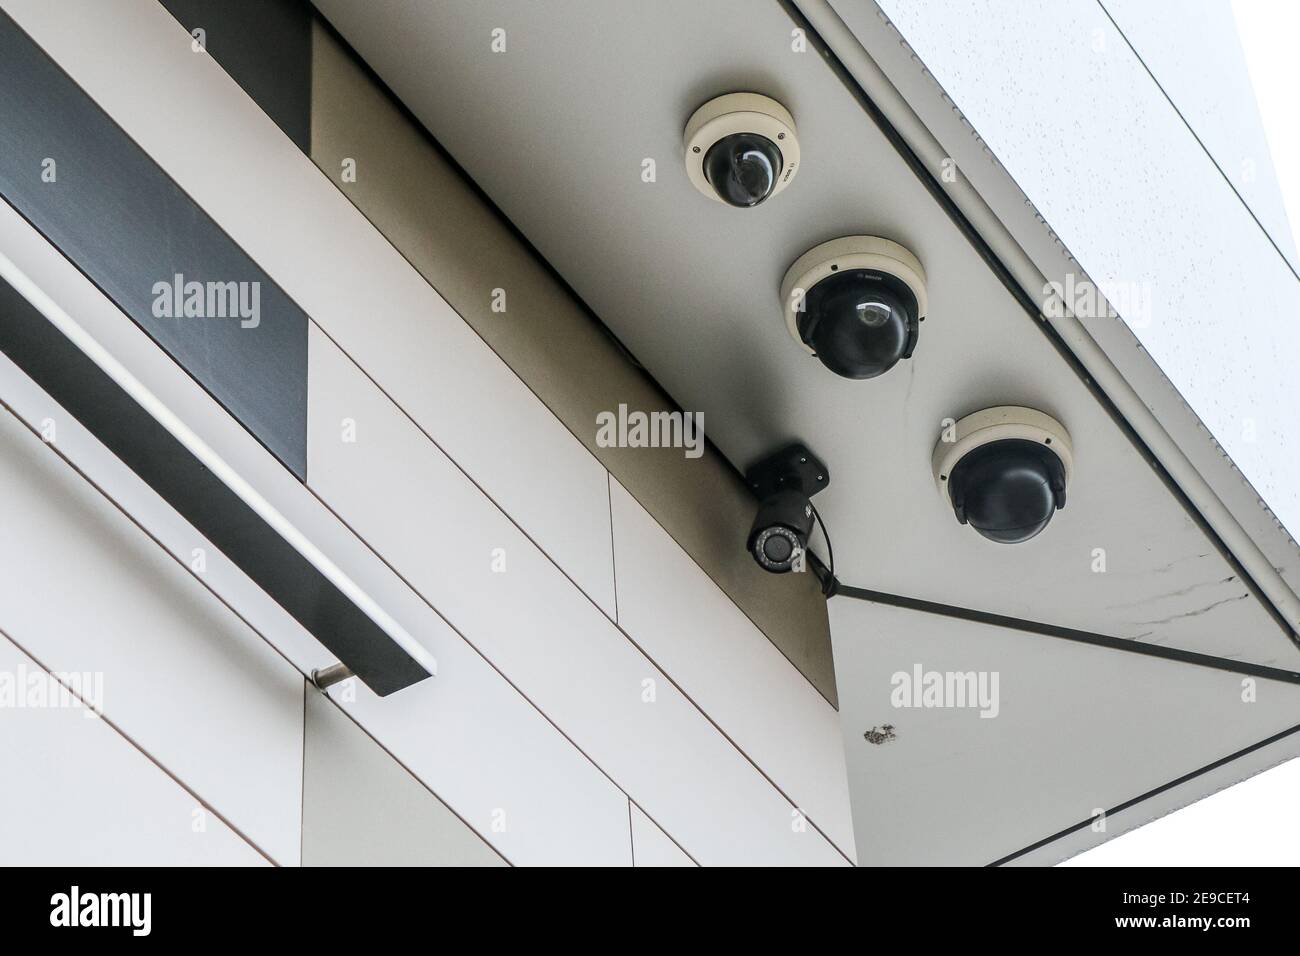 A detail of four cameras on the administrative building. Big brother is watching you. Stock Photo